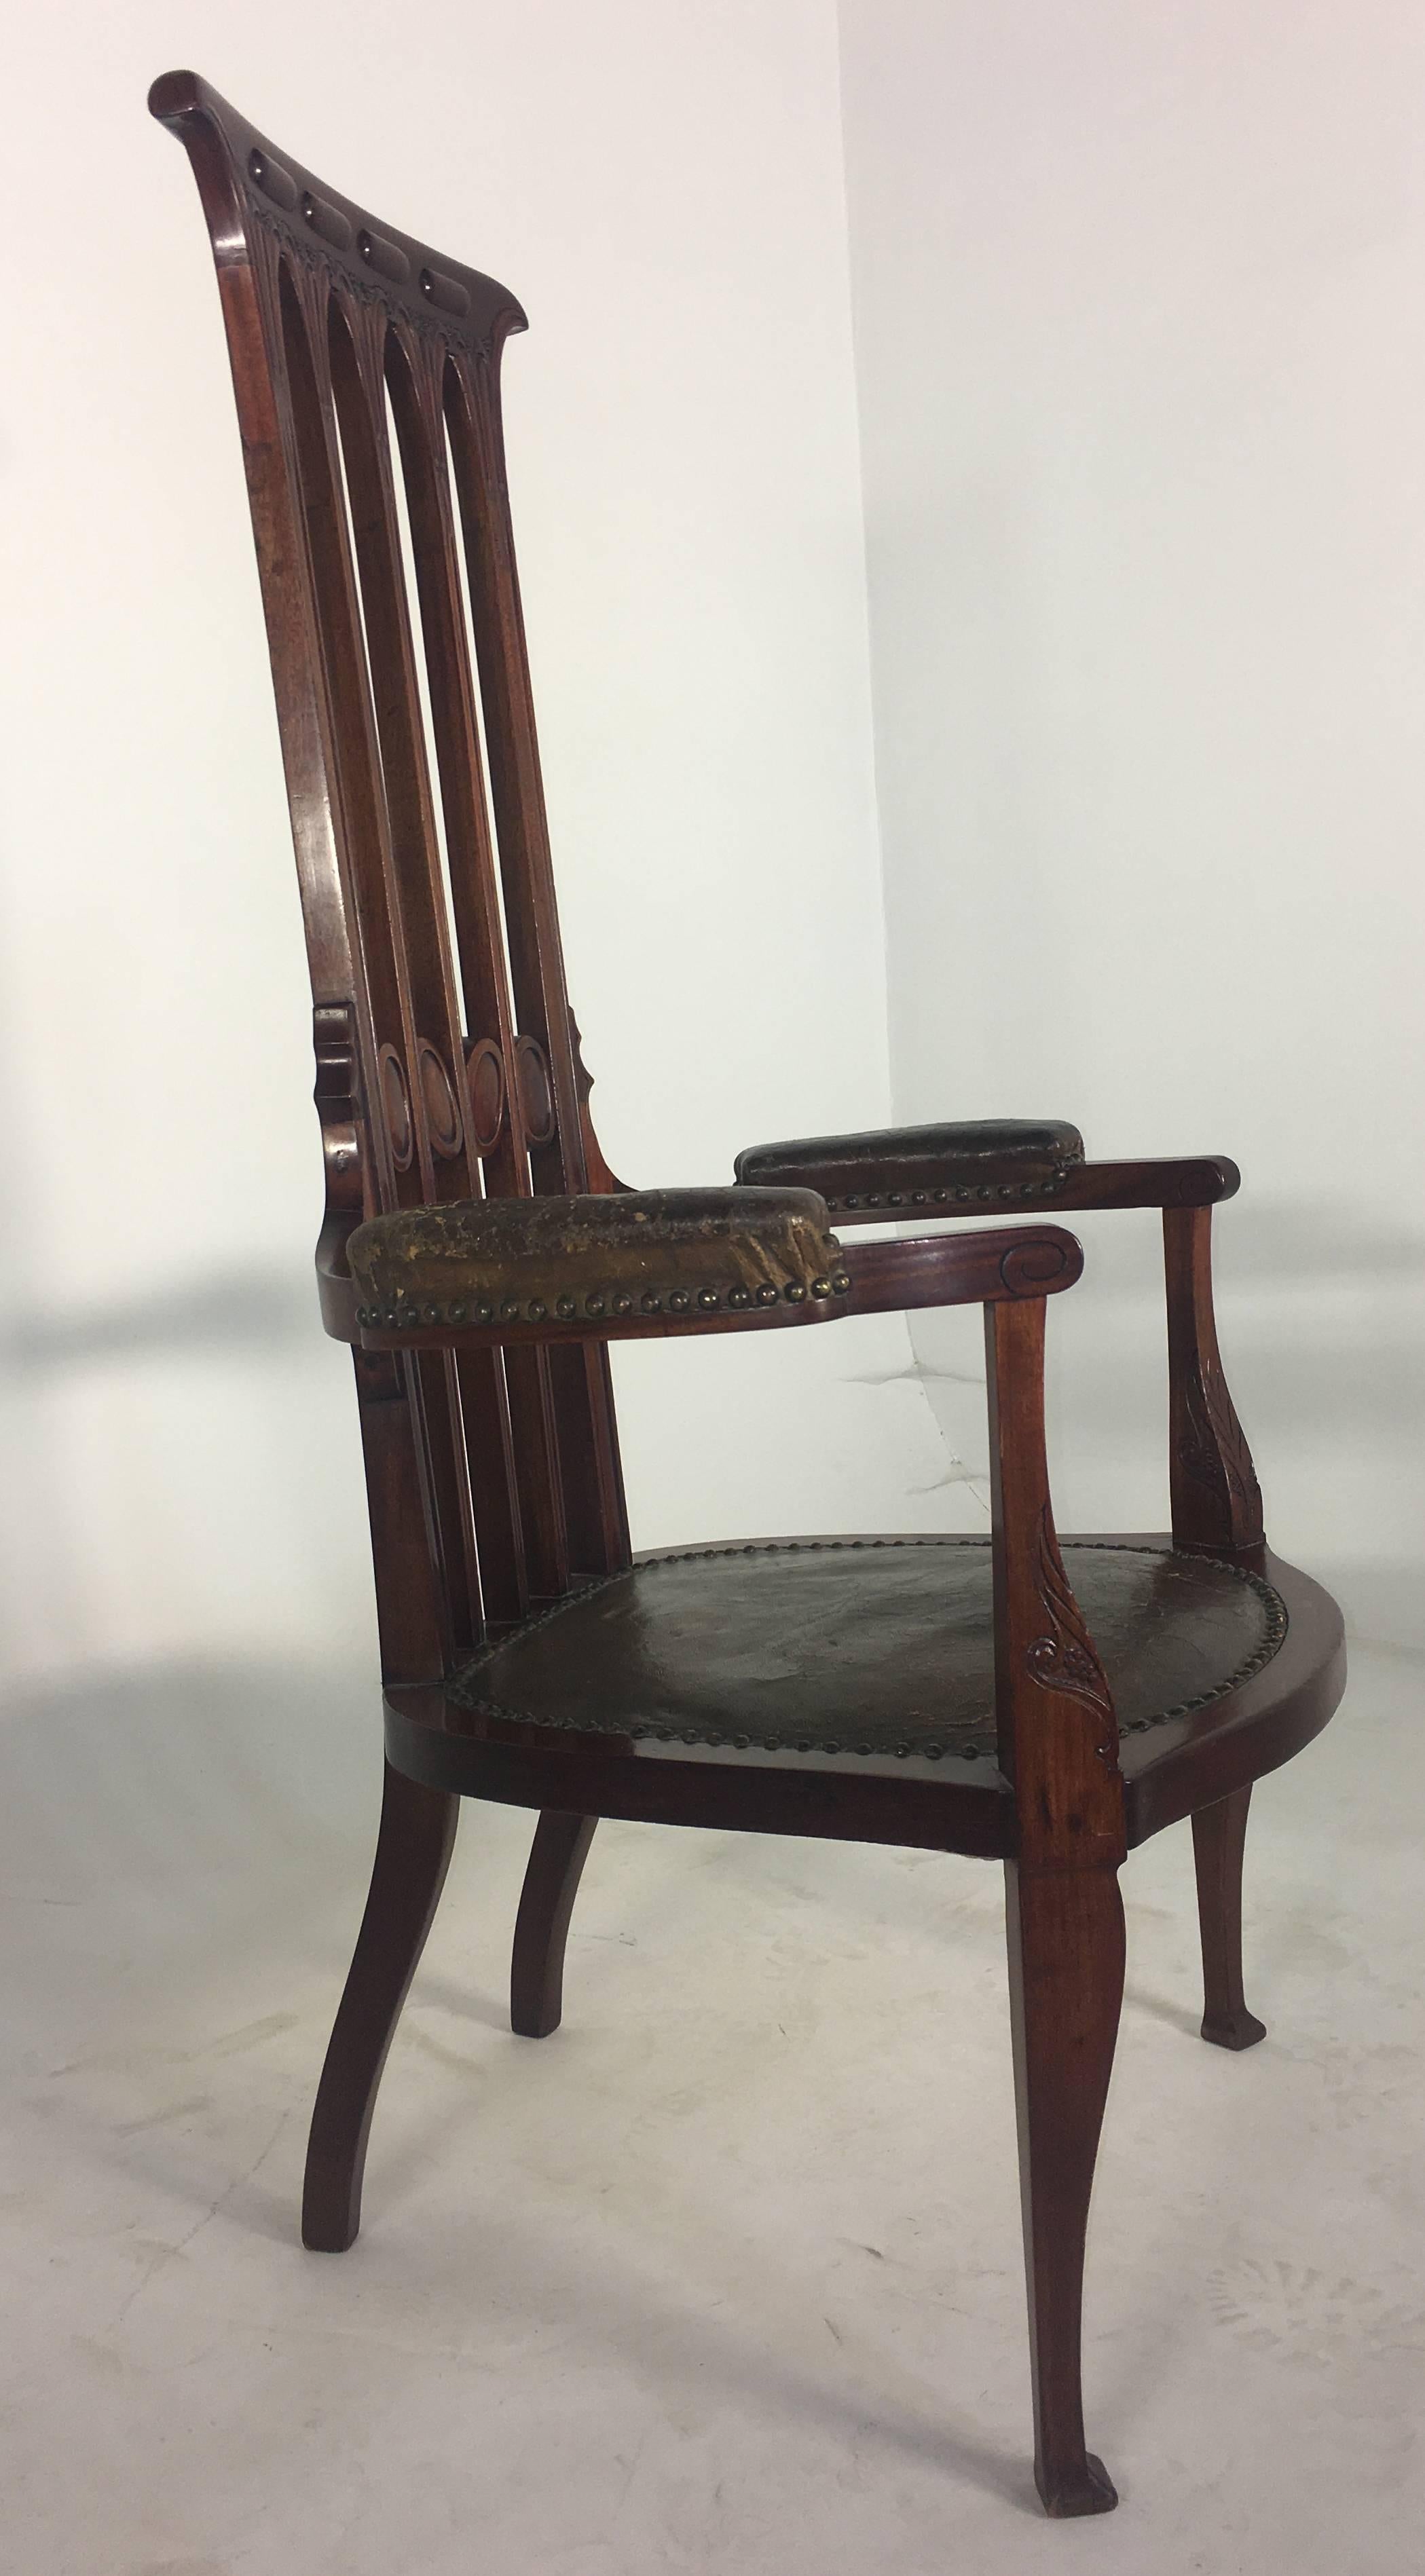 chair with the js